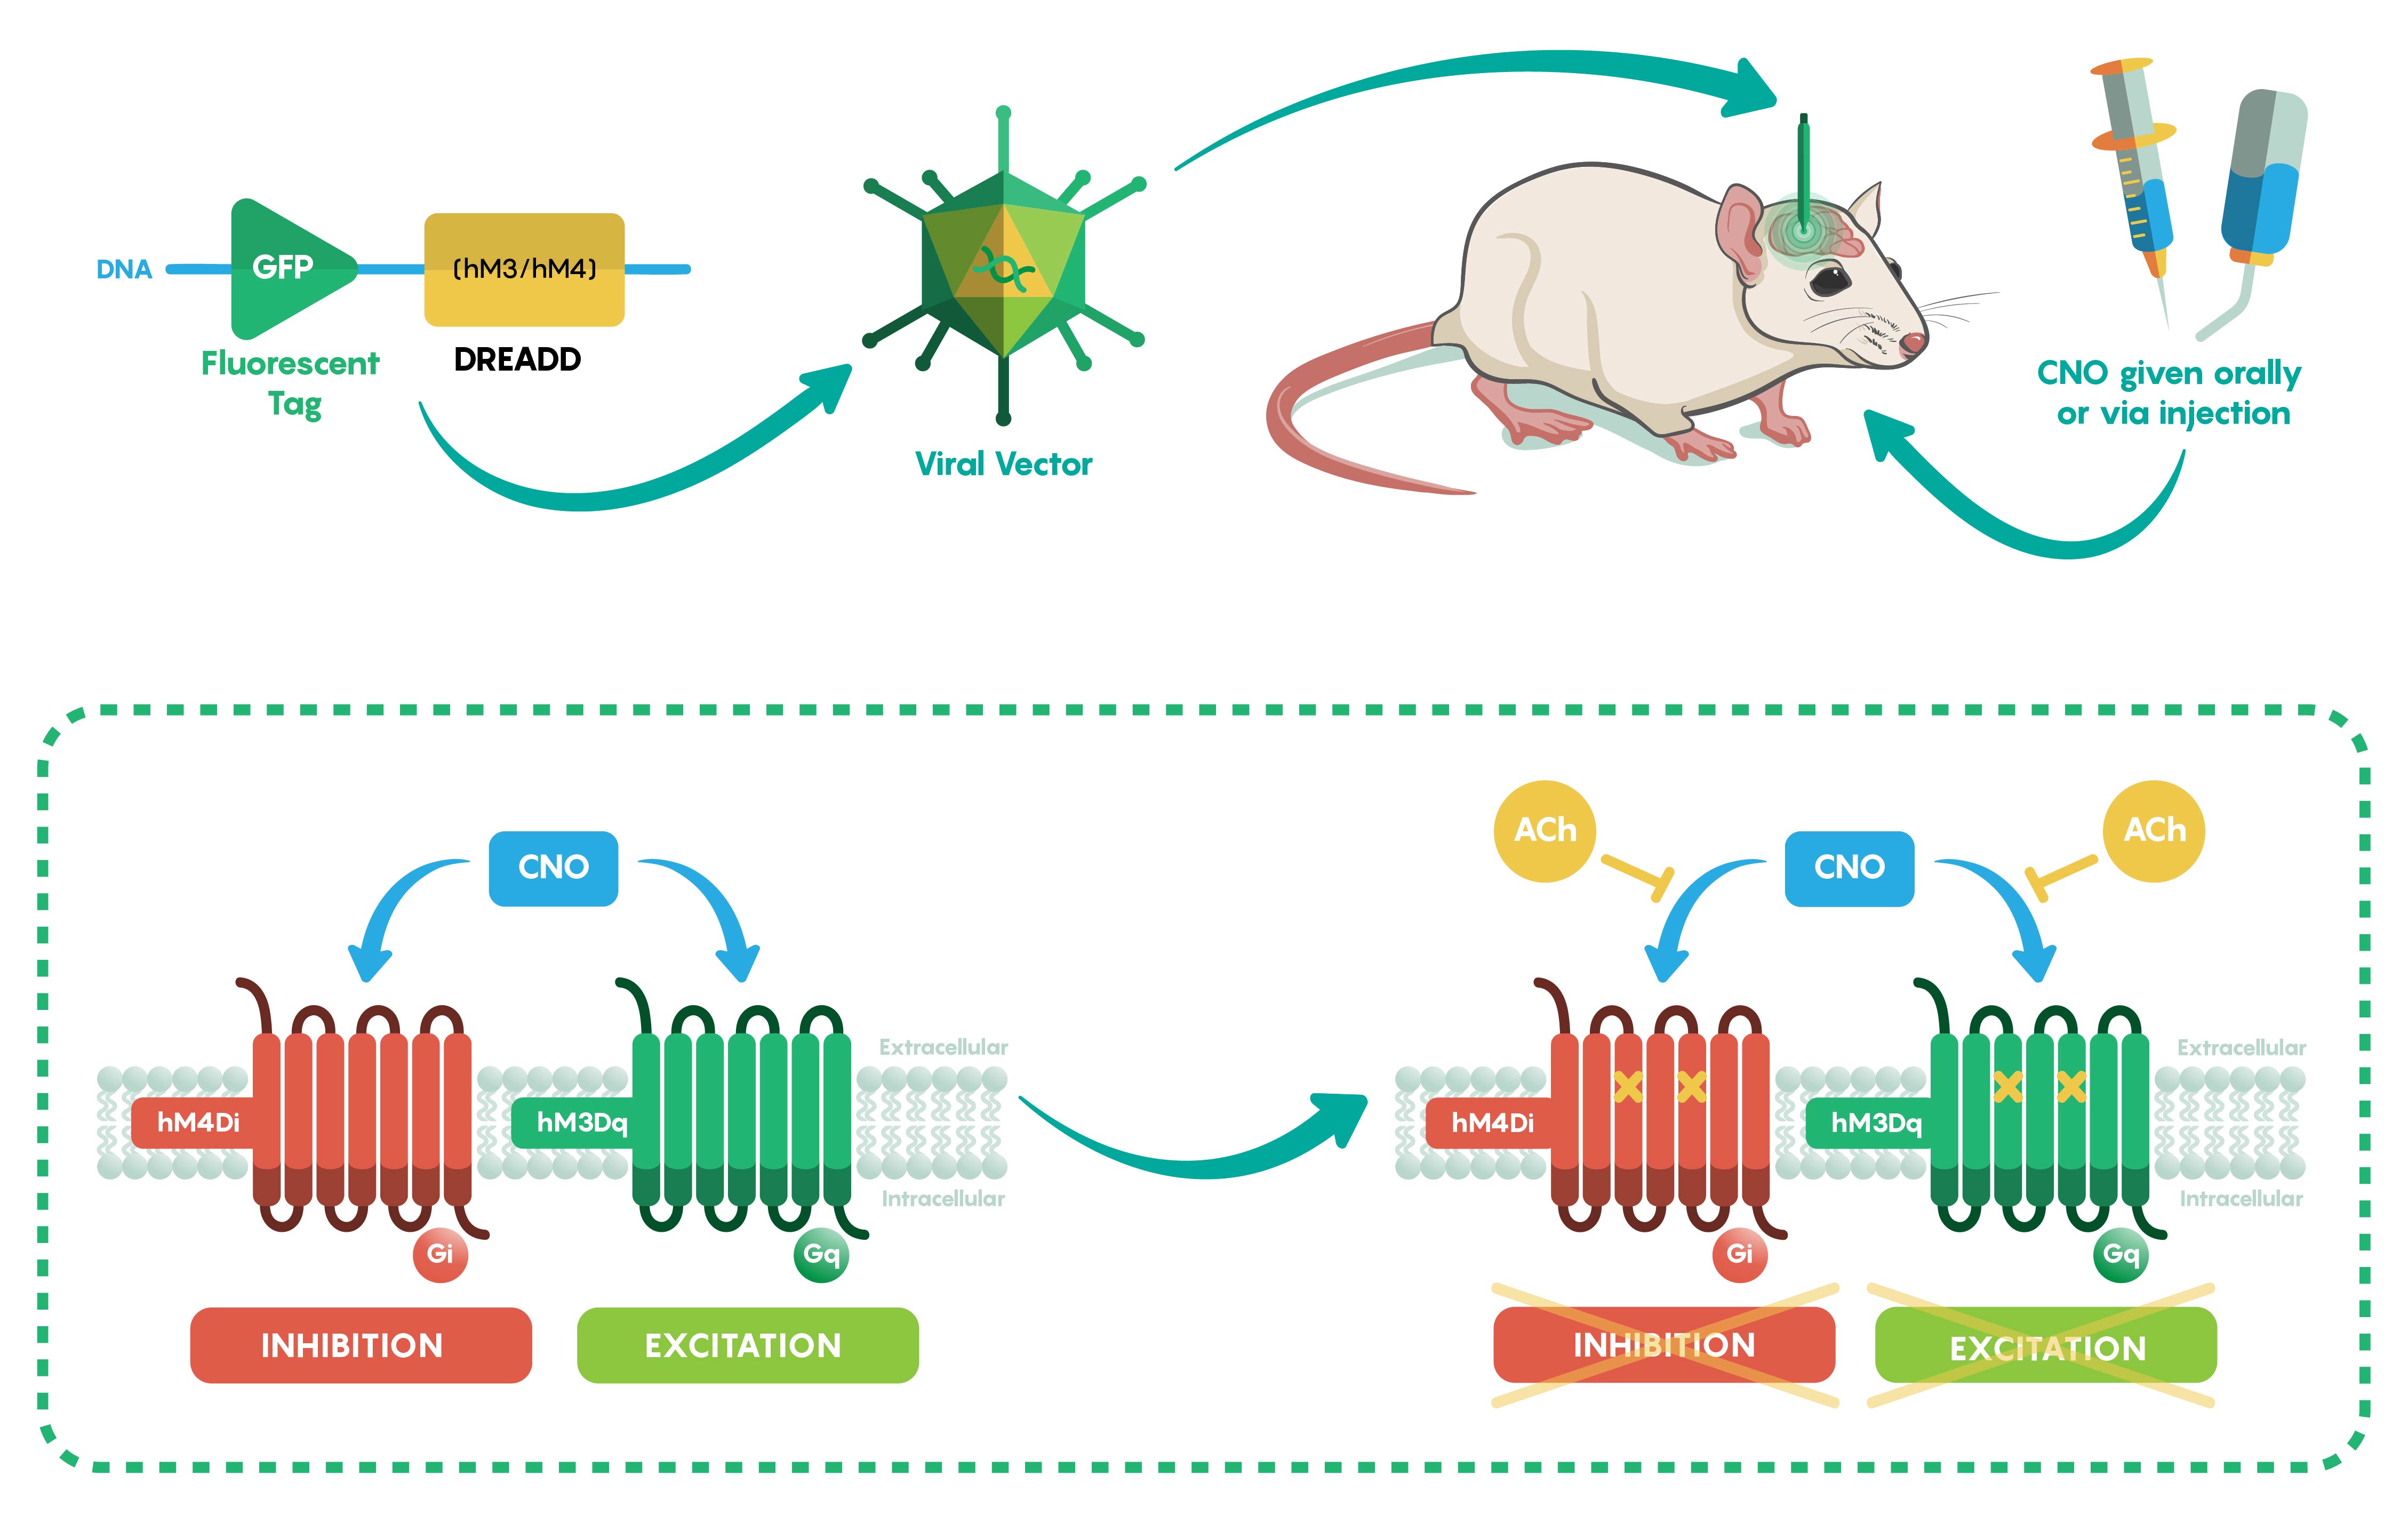 Schematic overview of how different variants of DREADDs (hM3Dq and hM4Di) can be used to activate and also inhibit groups of neurons using CNO. The figure also shows achetylcholine's (ACh) inhibitory effects on CNO.